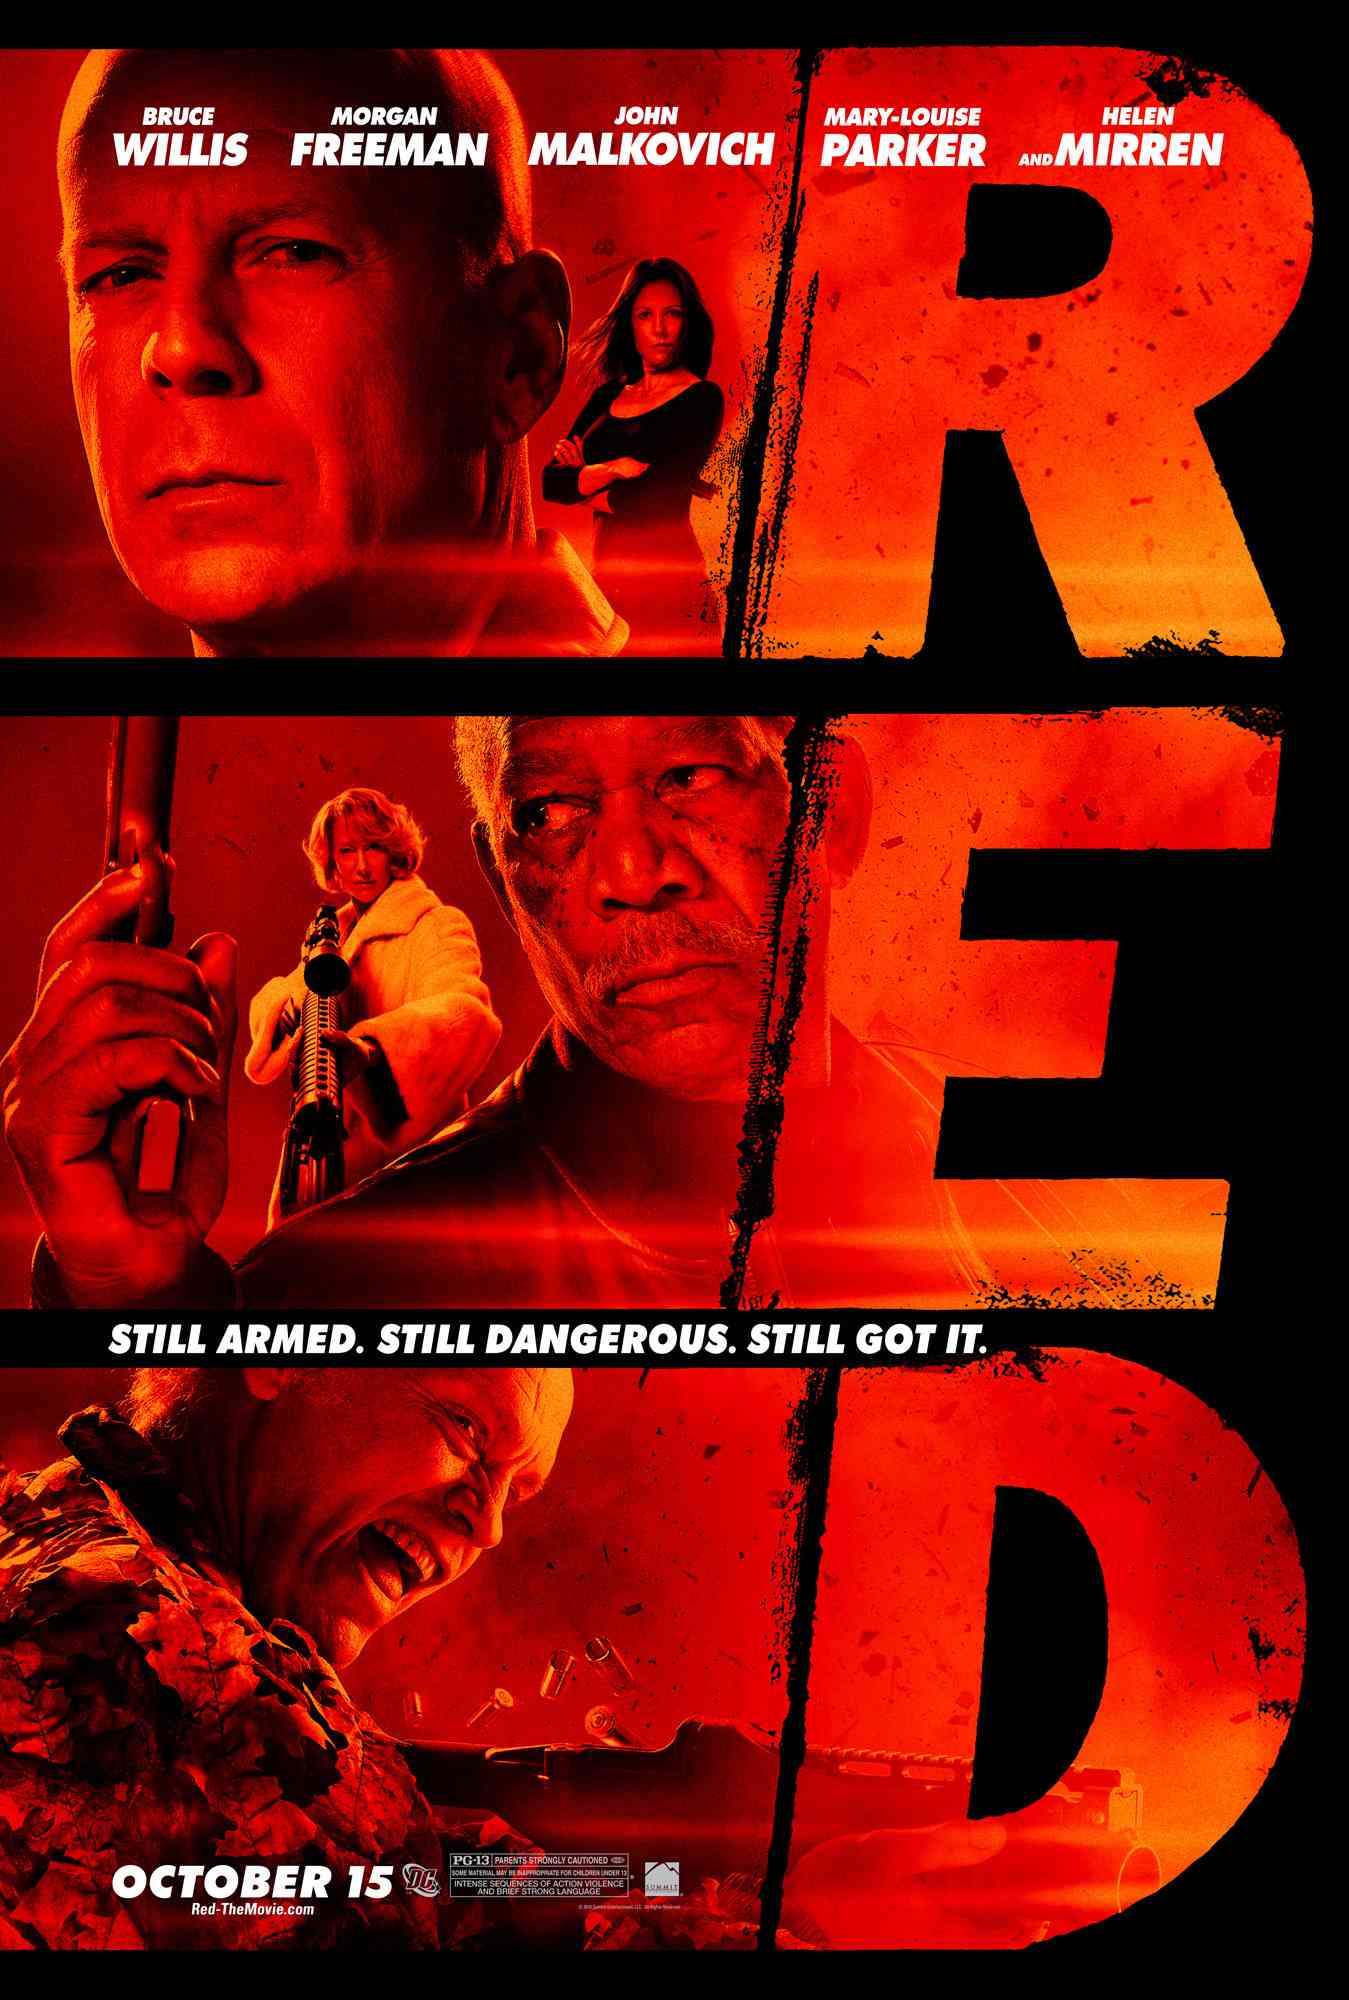 FULL MOVIE: RED (2010) [Action]